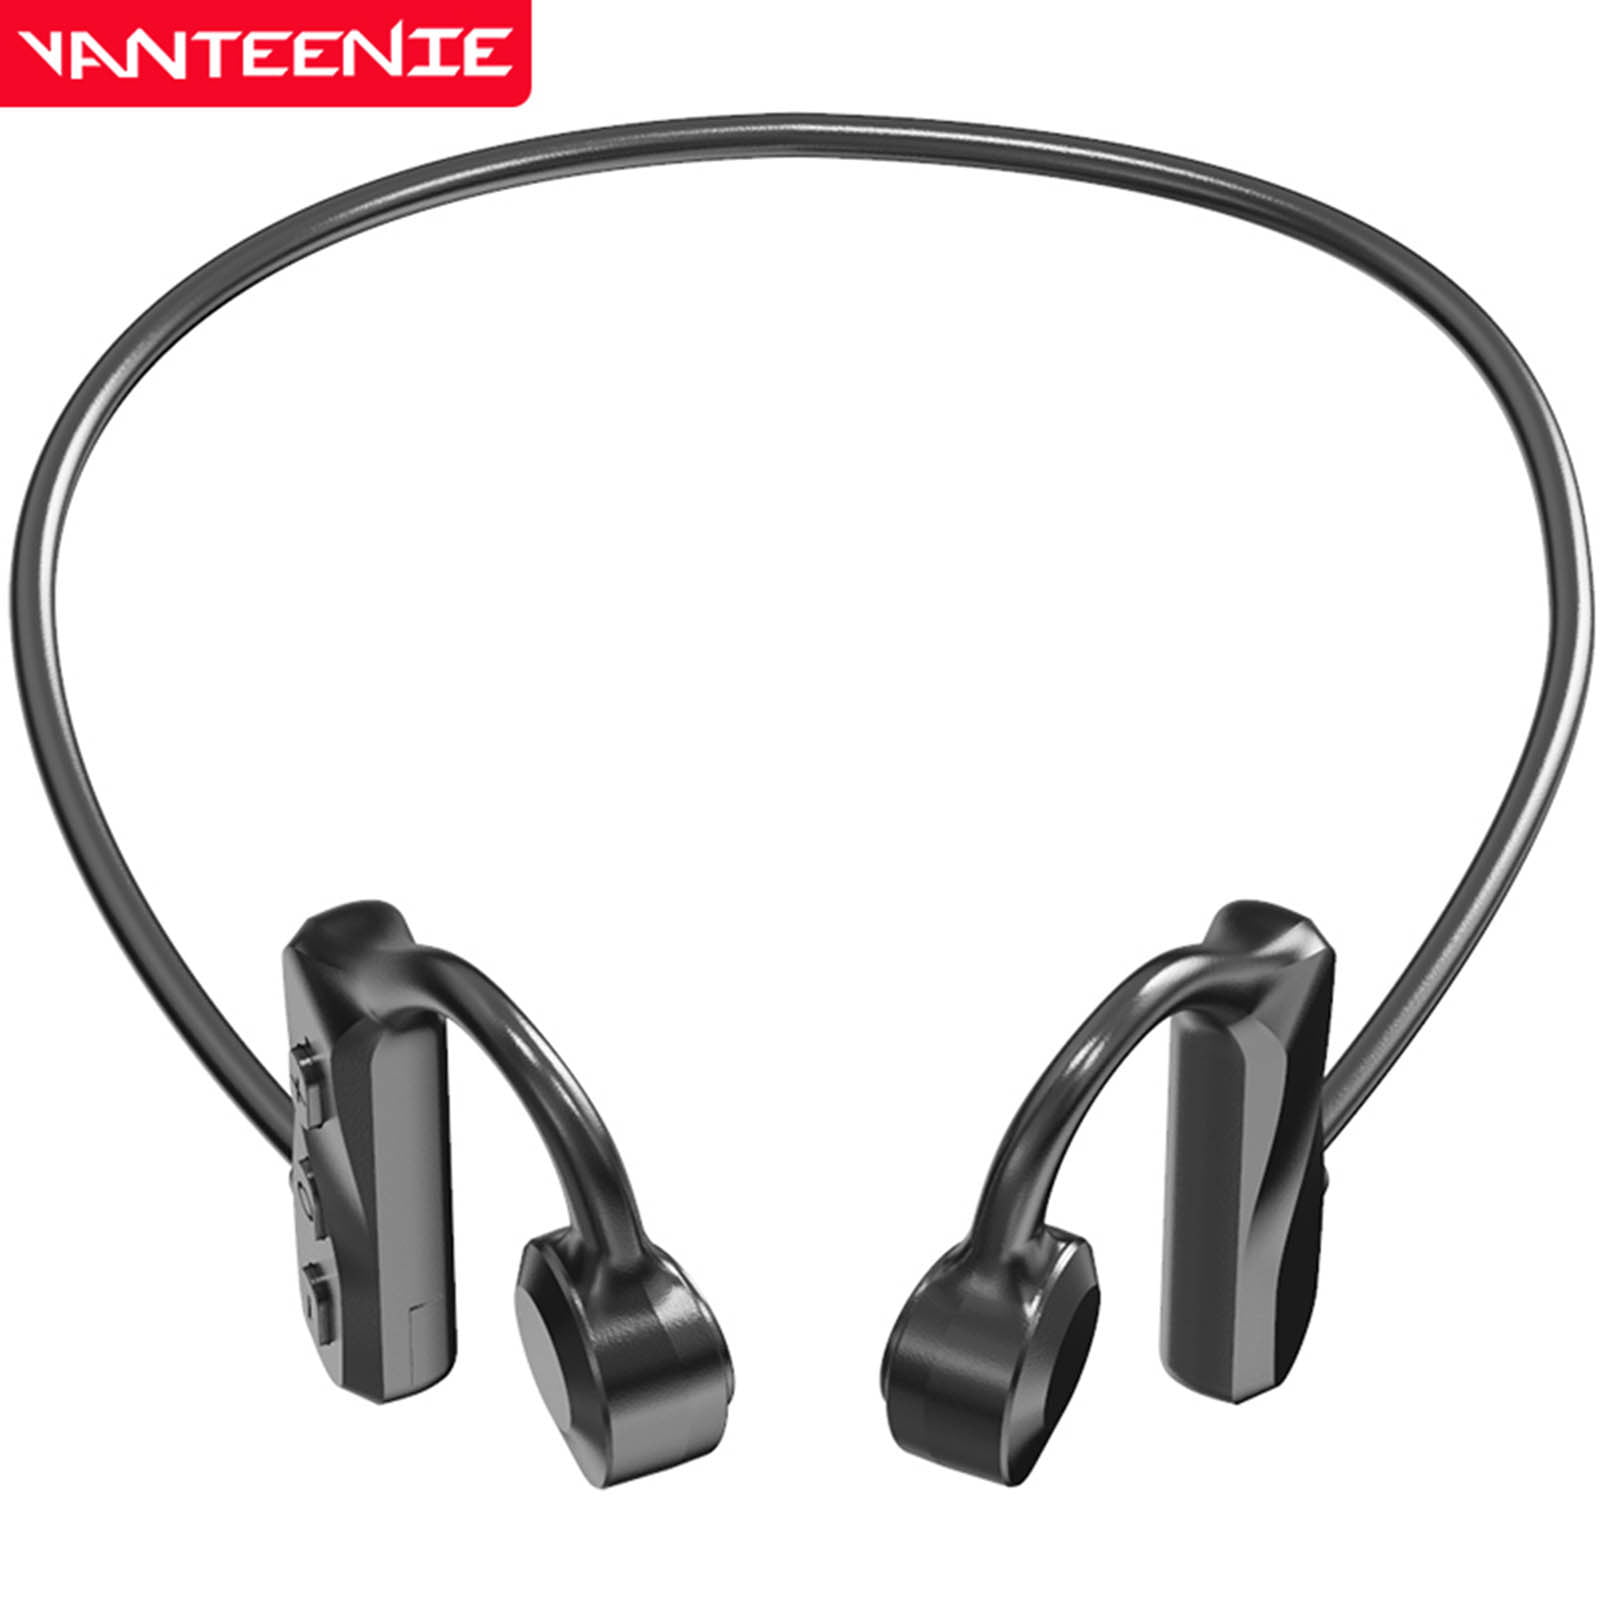 Chueow Conduction New Wireless Bluetooth K69 Non Ear Neck Hanging Neck Ultra Standby Running,Compatible Electronics Accessories - Walmart.com